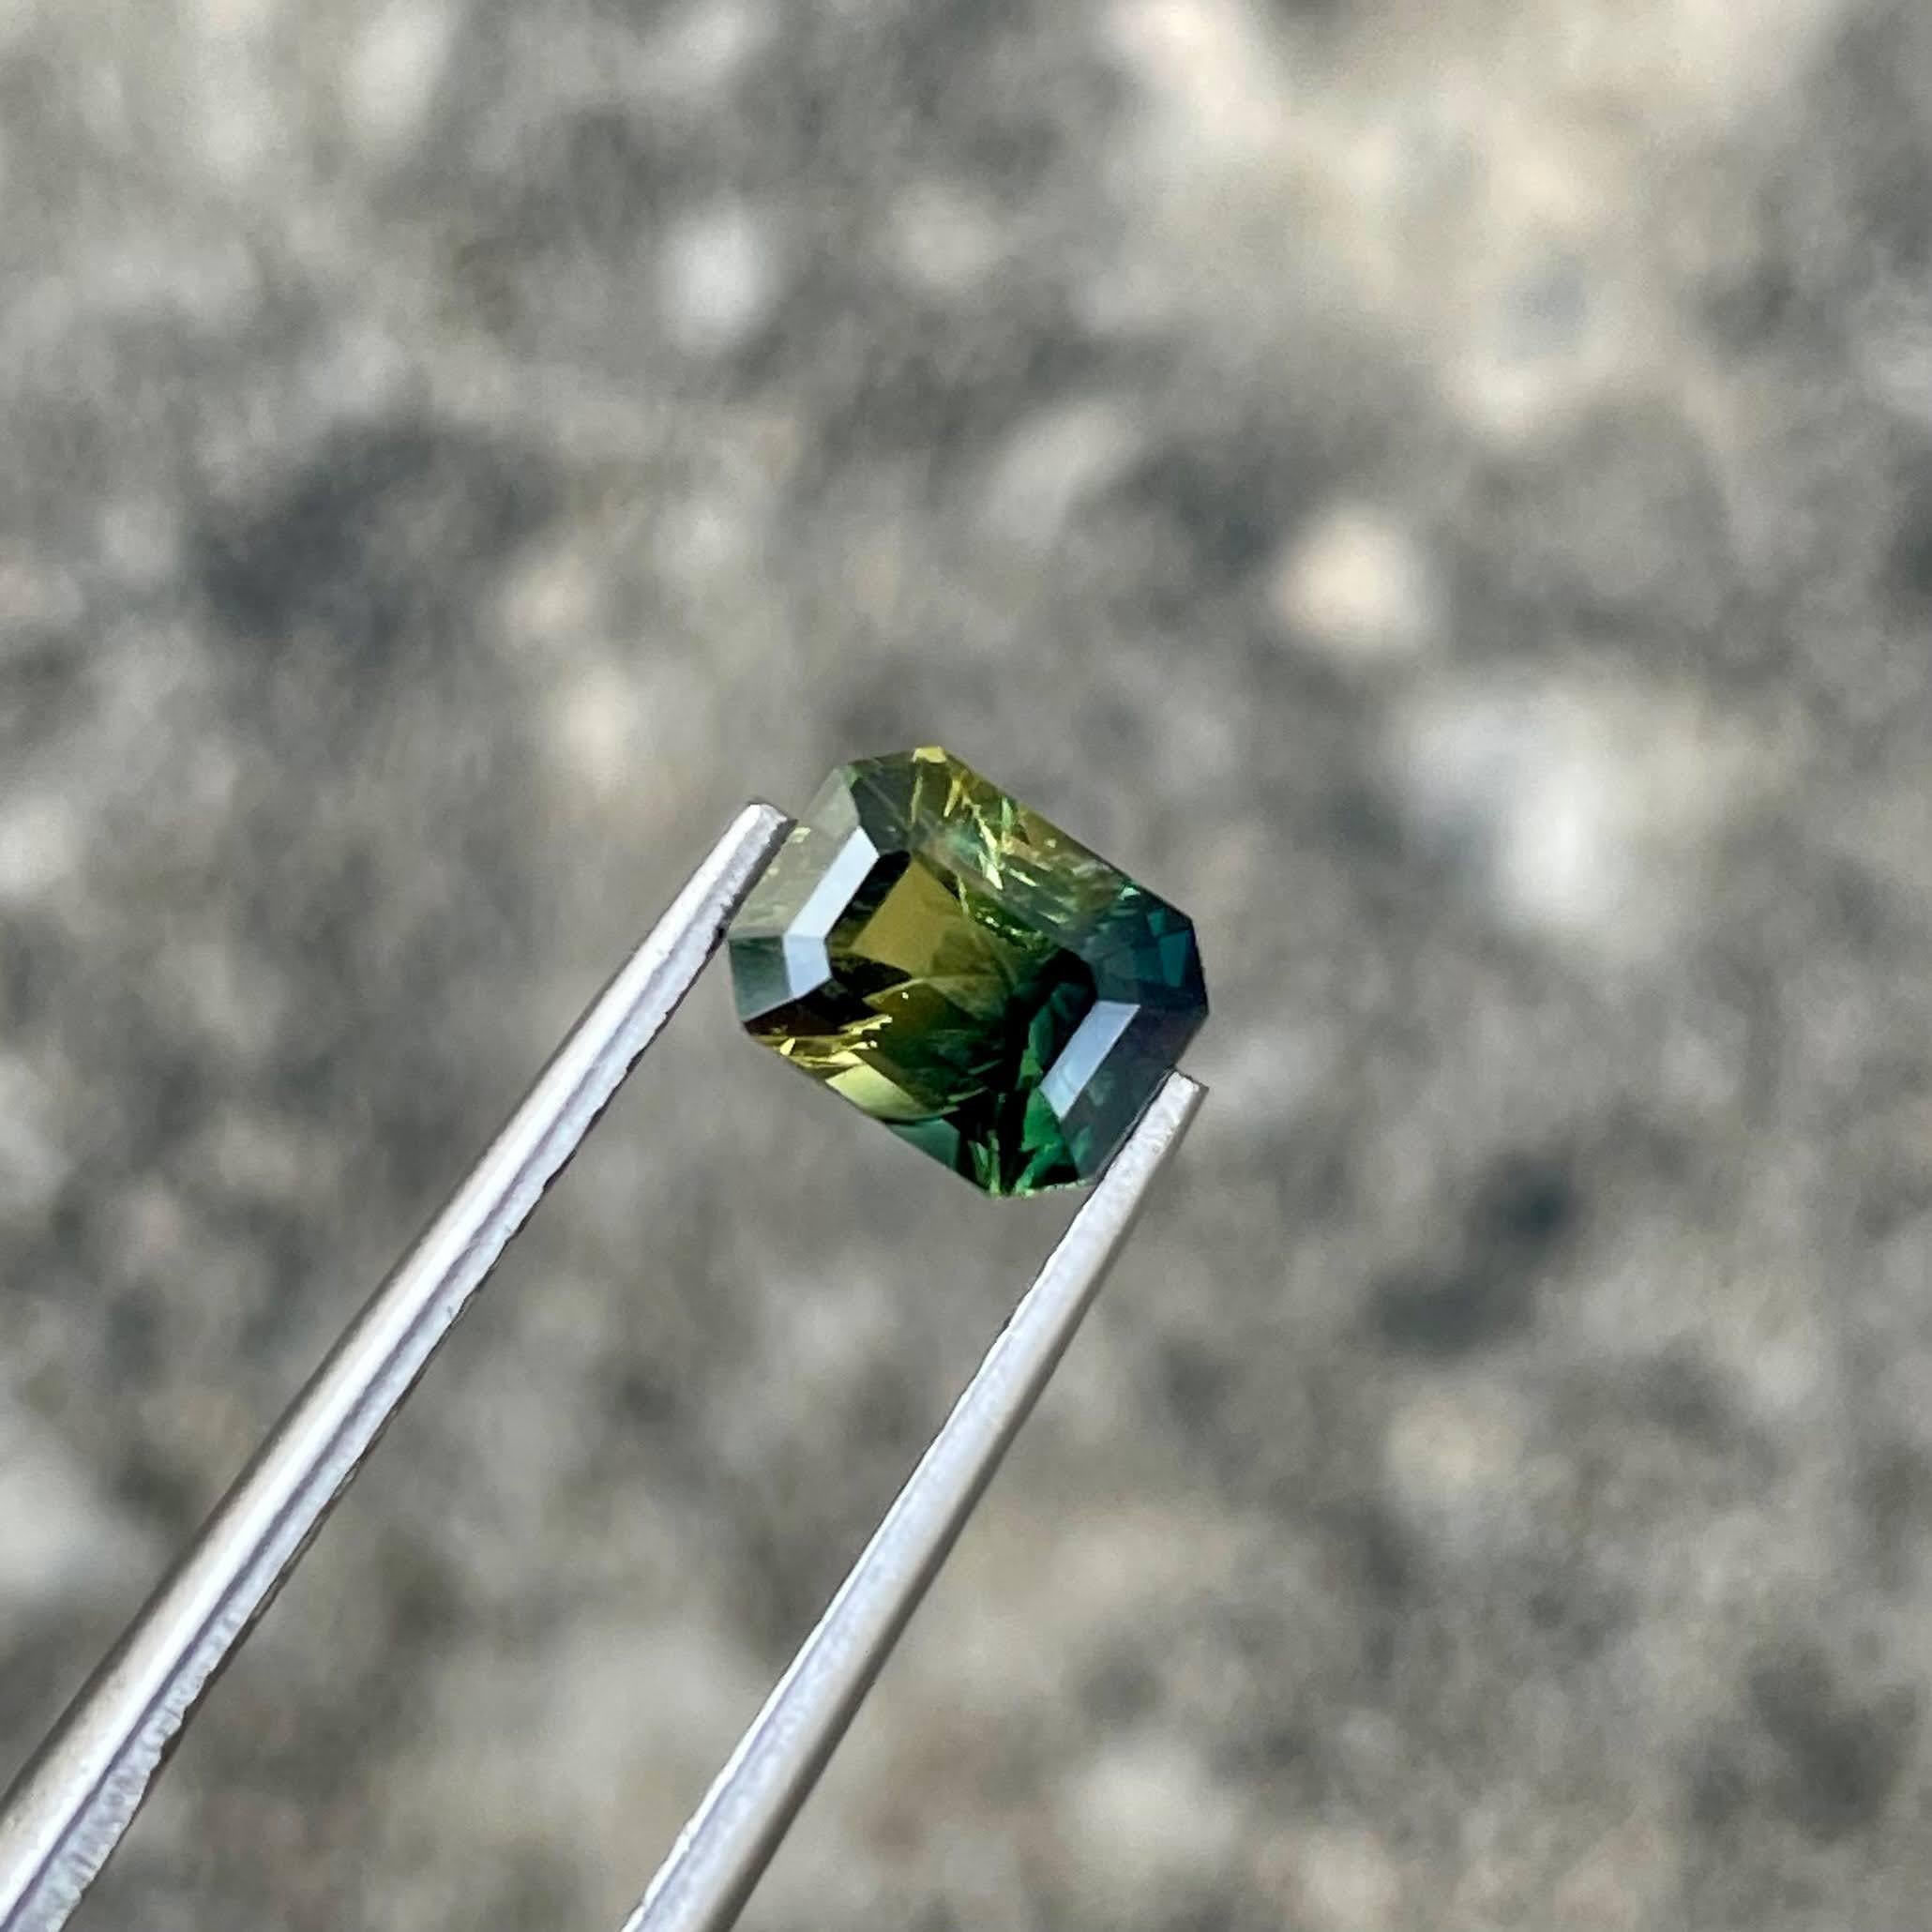 Weight 1.60 carats 
Dimensions 6.9x5.4x4.2 mm
Treatment heat
Clarity VVS
Origin Madagascar
Shape Octagon
Cut Emerald




The 1.60-carat Bicolor Parti Sapphire Stone, with its mesmerizing Emerald Cut, stands as a natural marvel hailing from the